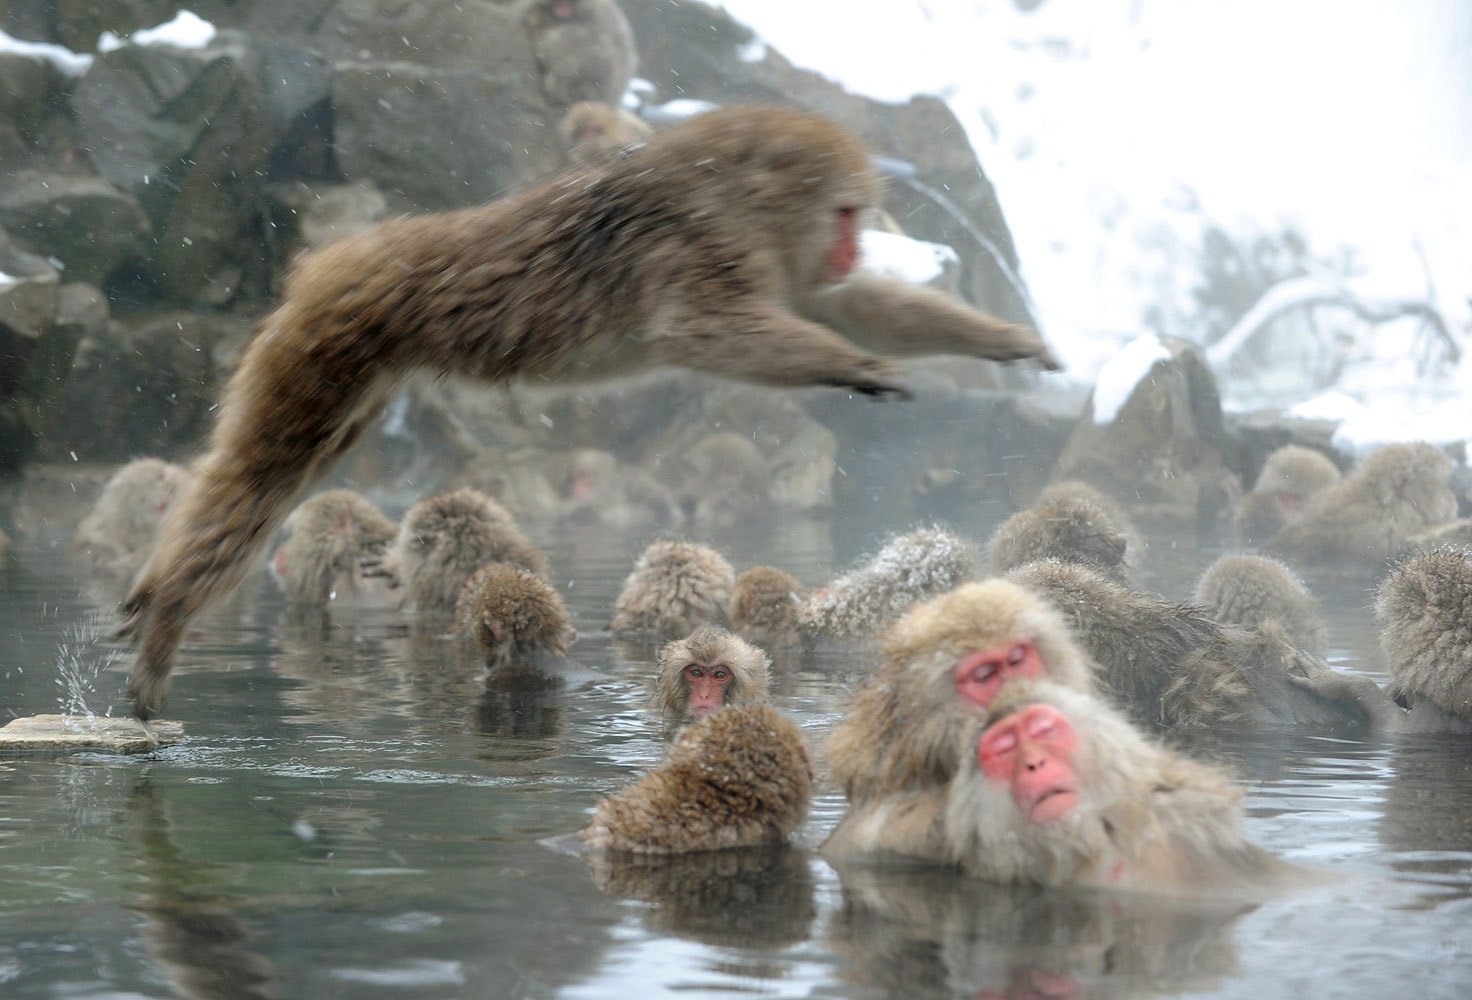 Japanese macaque monkeys, known as "snow monkeys," take an open-air hot spring bath as snowflakes fall at the Jigokudani Monkey Park in the town of Yamanouchi, Nagano prefecture on Jan. 19, 2014.